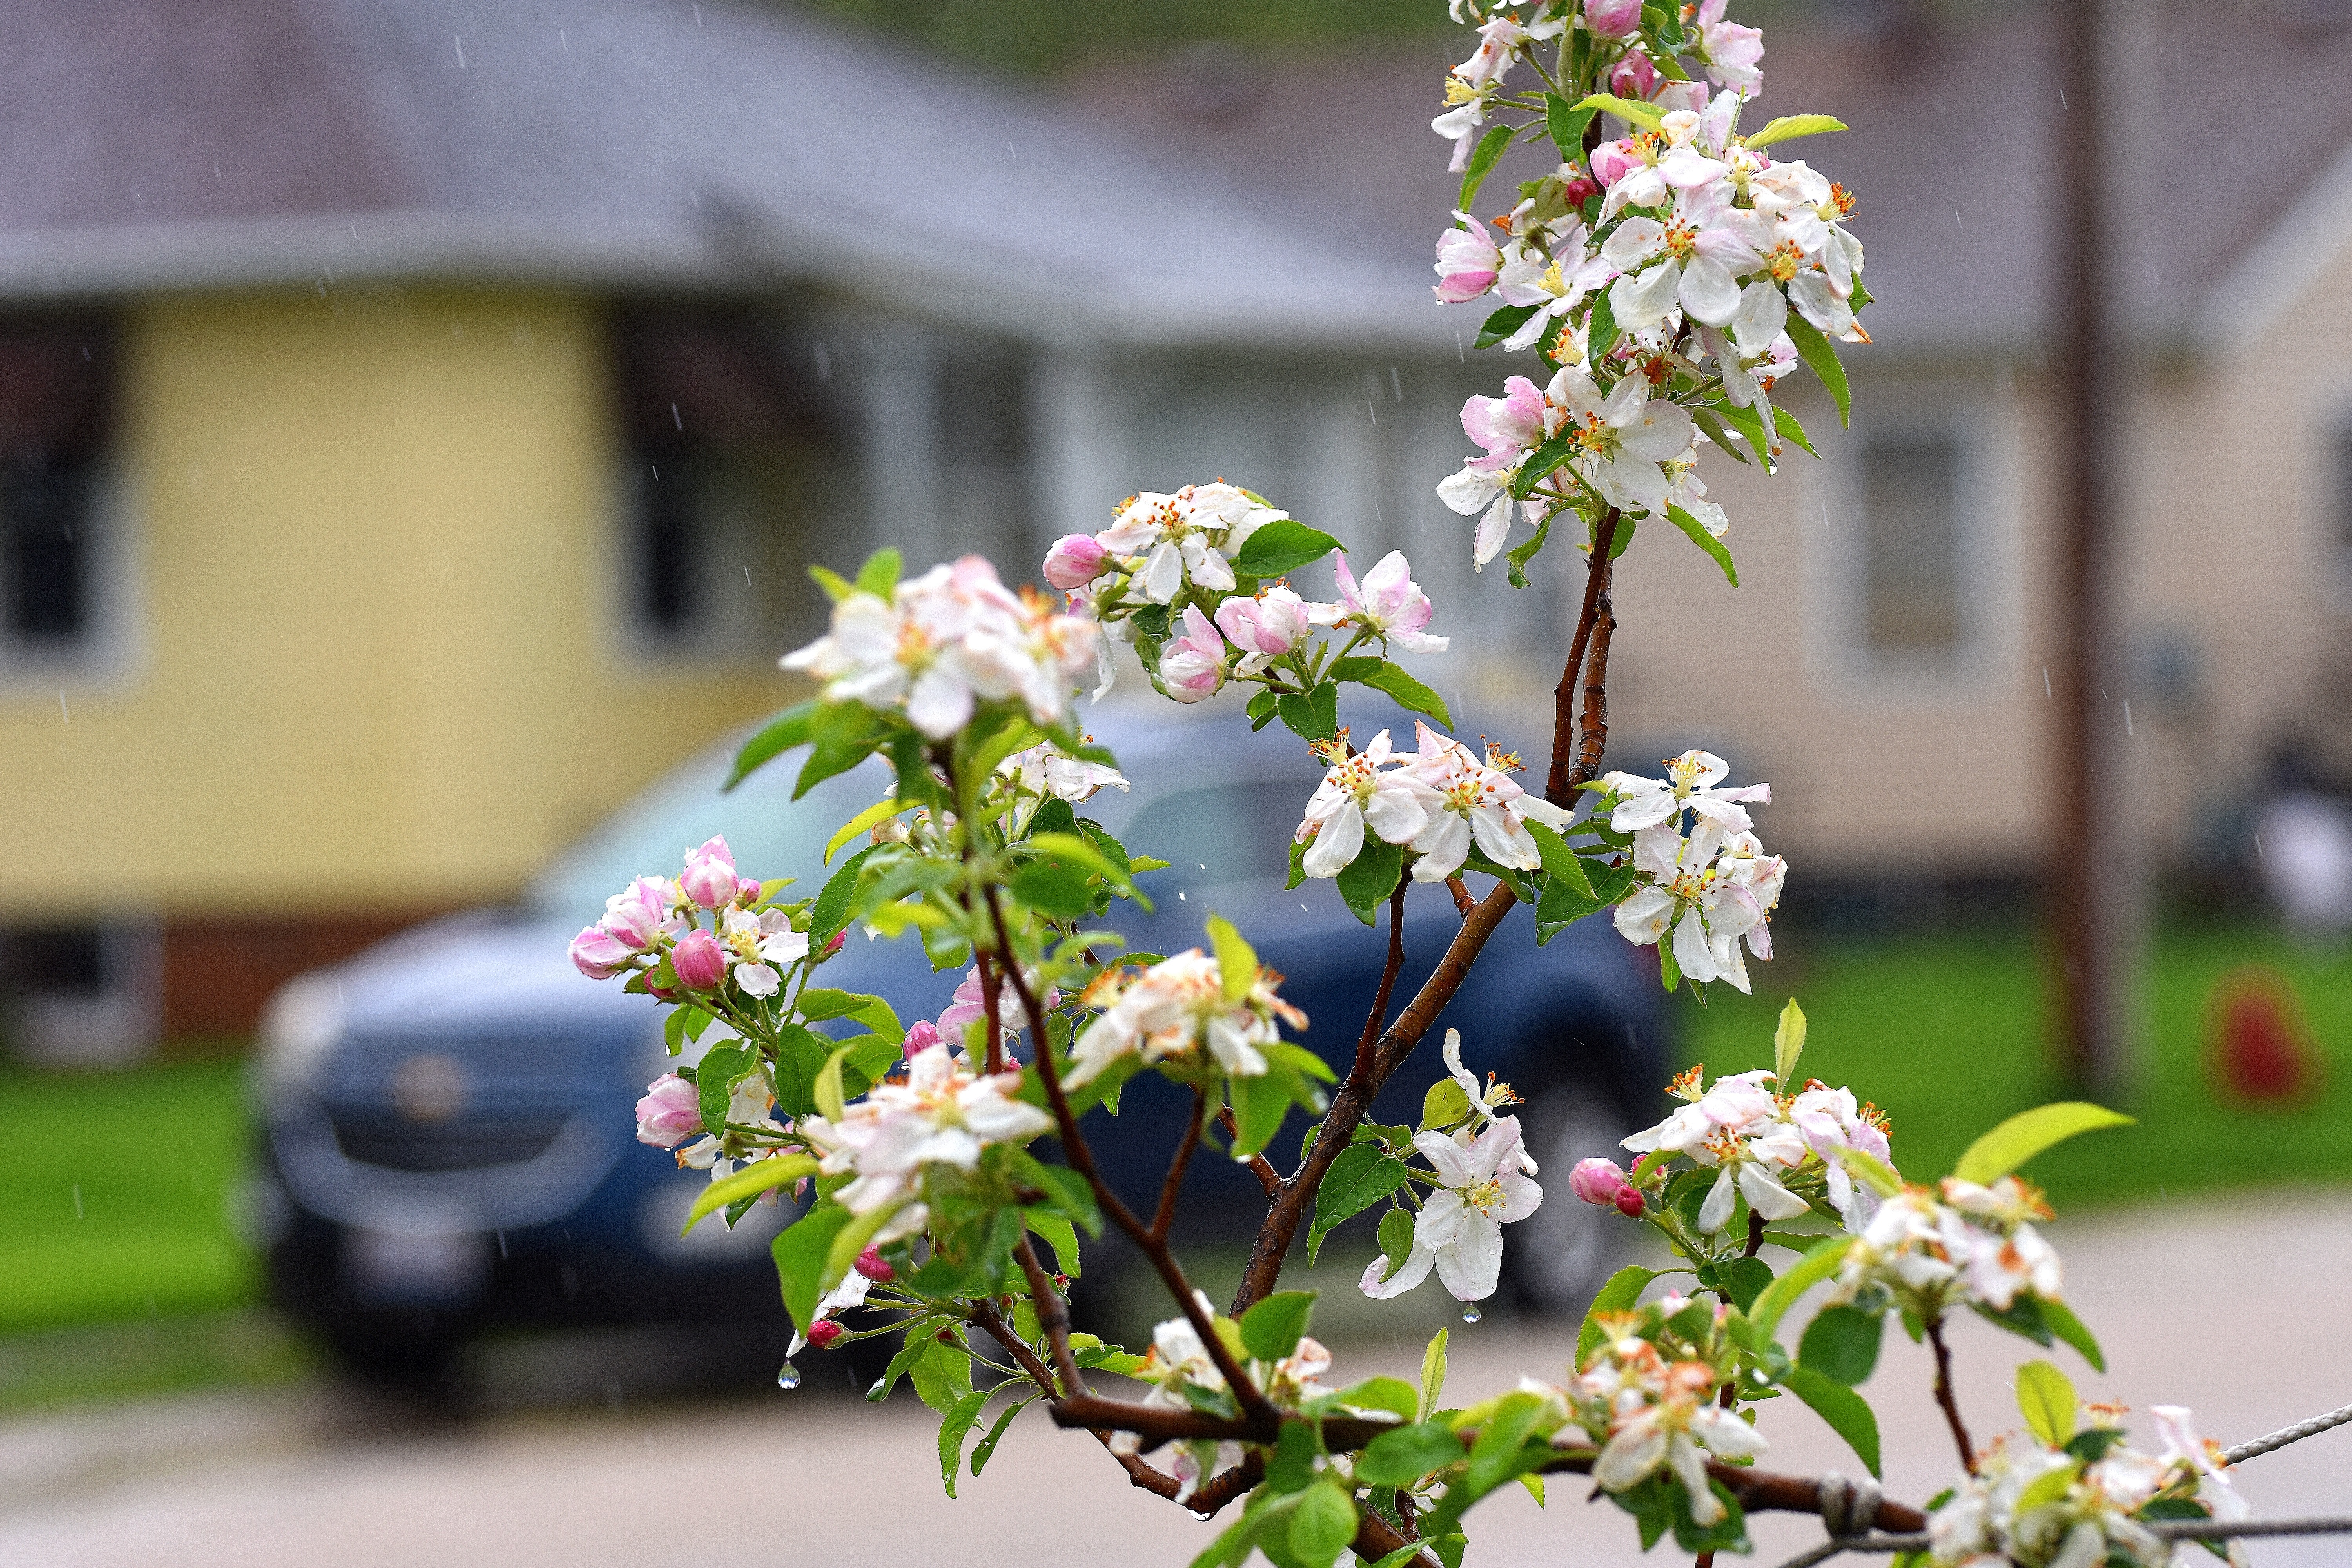 Apple blossoms in the rain | image tagged in blossoms,rain,kewlew | made w/ Imgflip meme maker